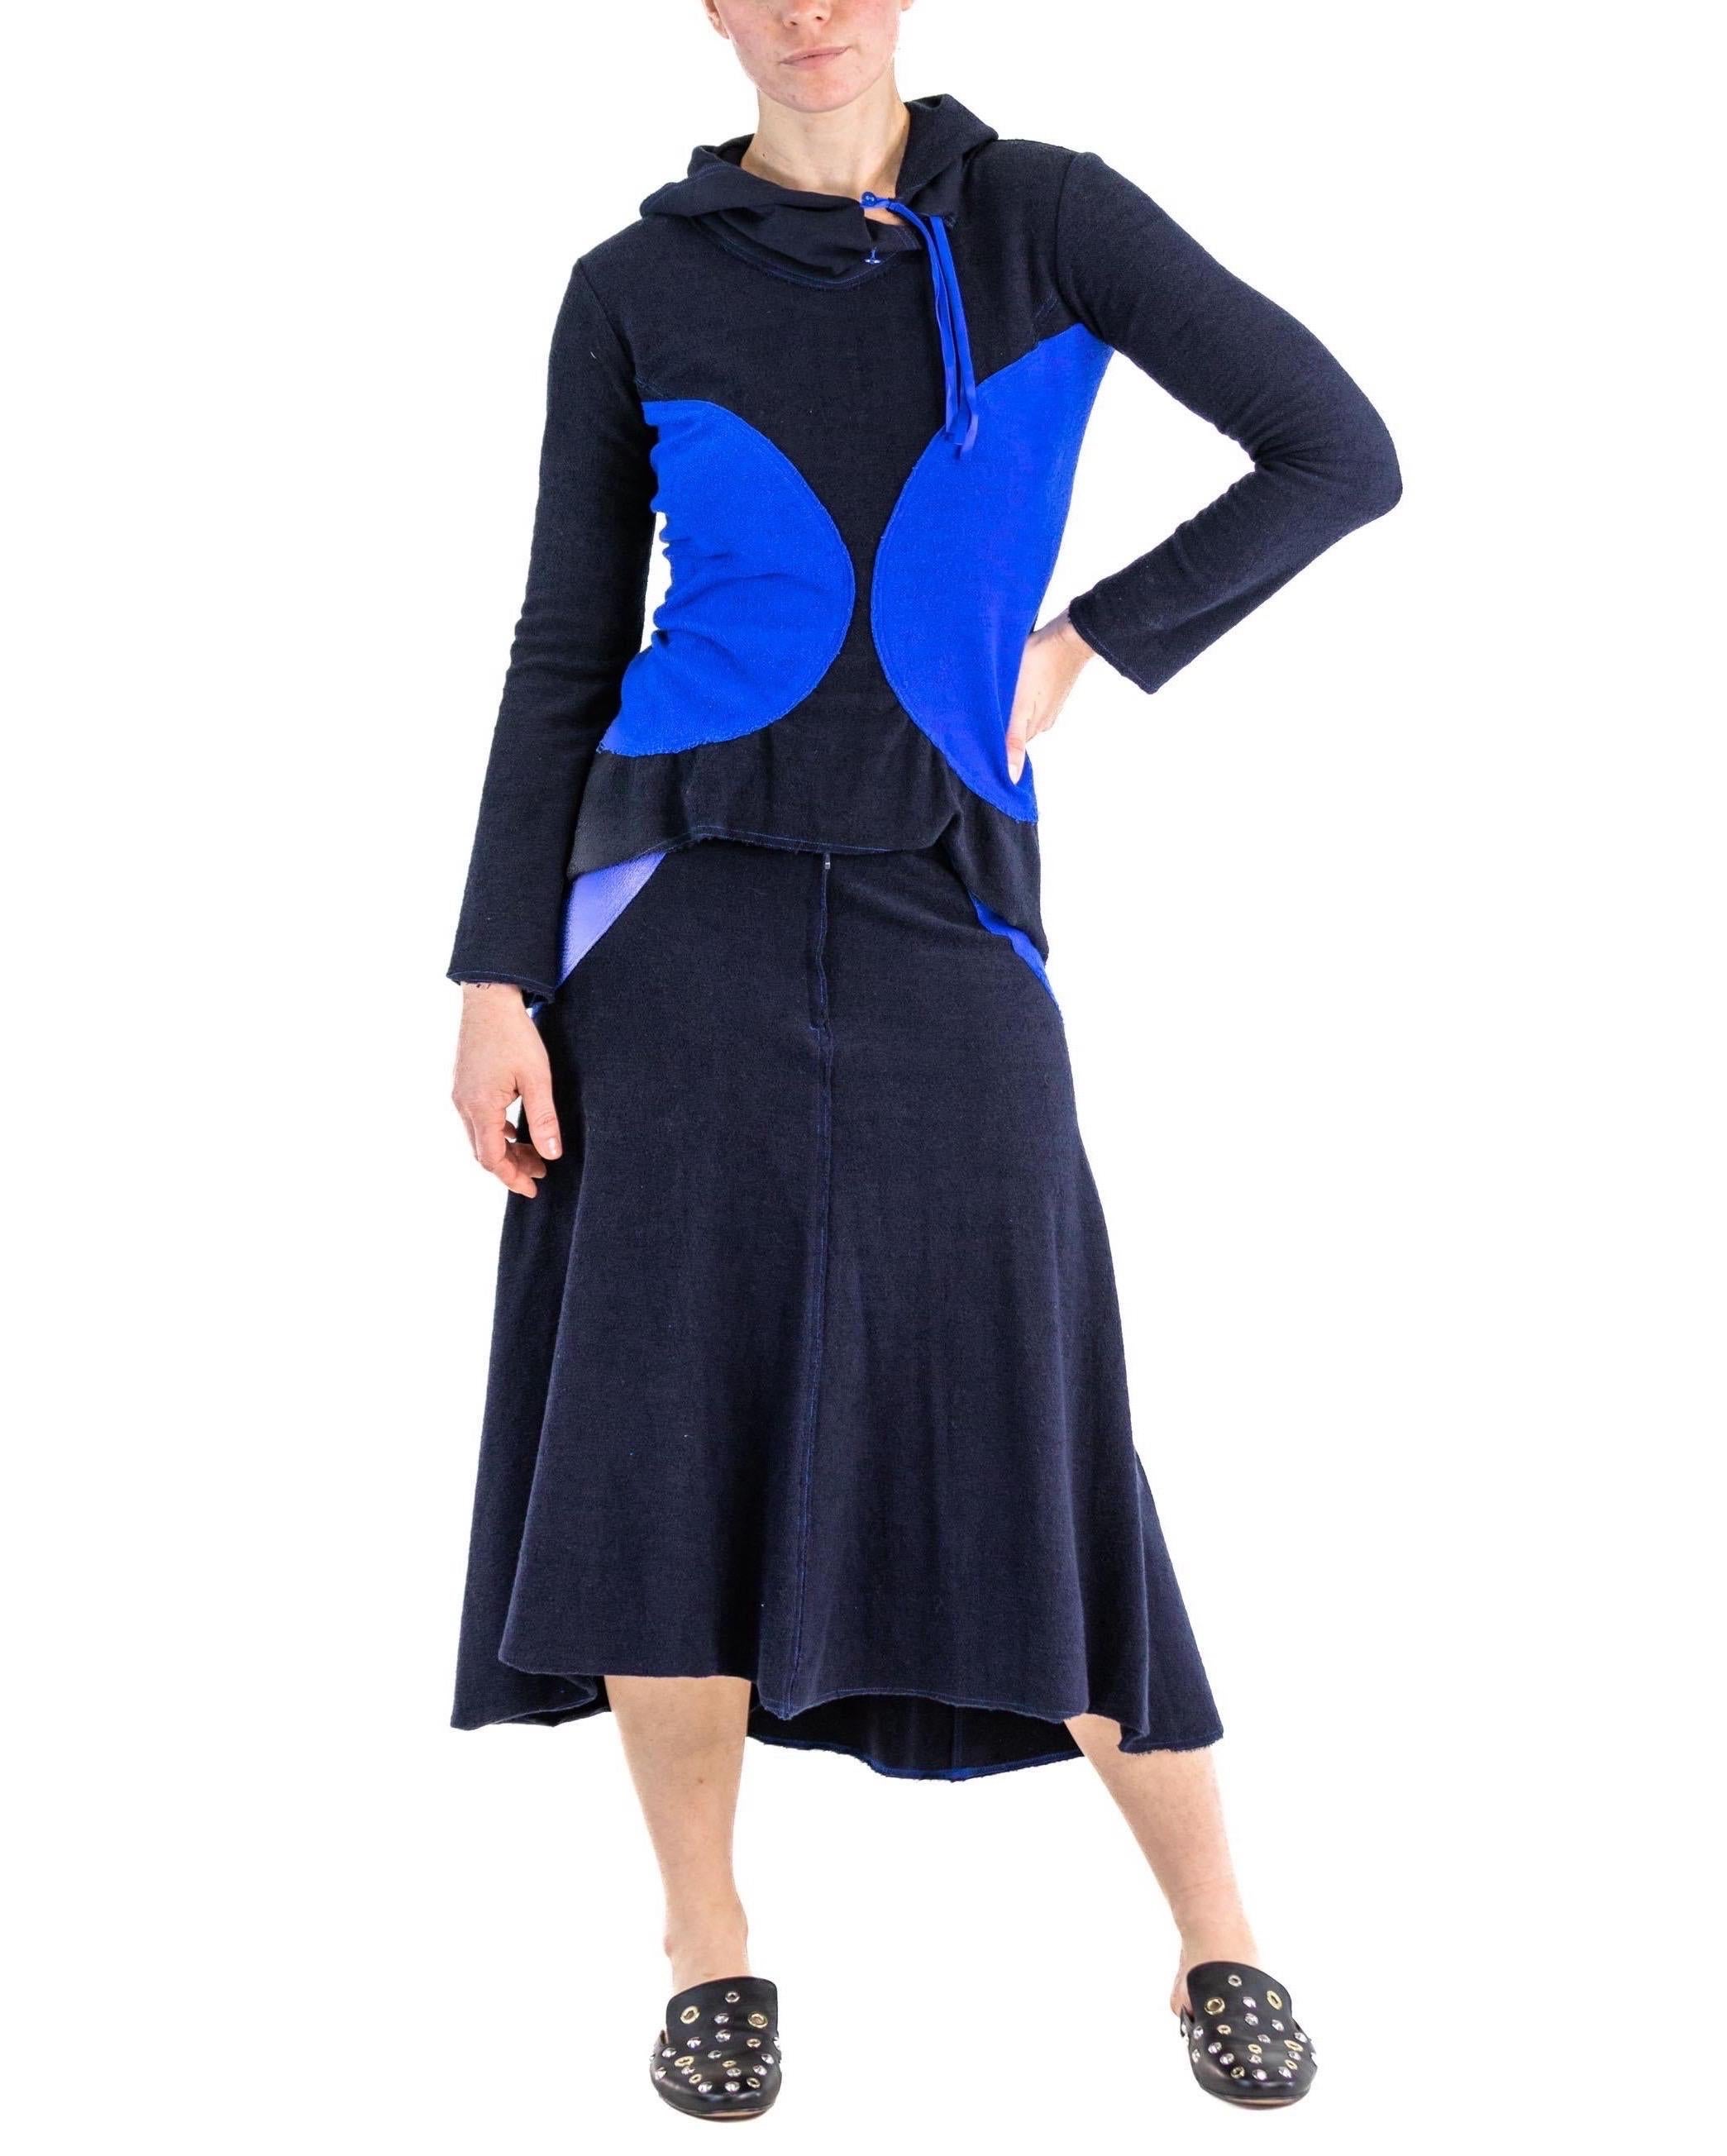 1990S ISSEY MIYAKE Cobalt Blue & Navy Cotton Terry  Colorblock Top Skirt Ensemb For Sale 2